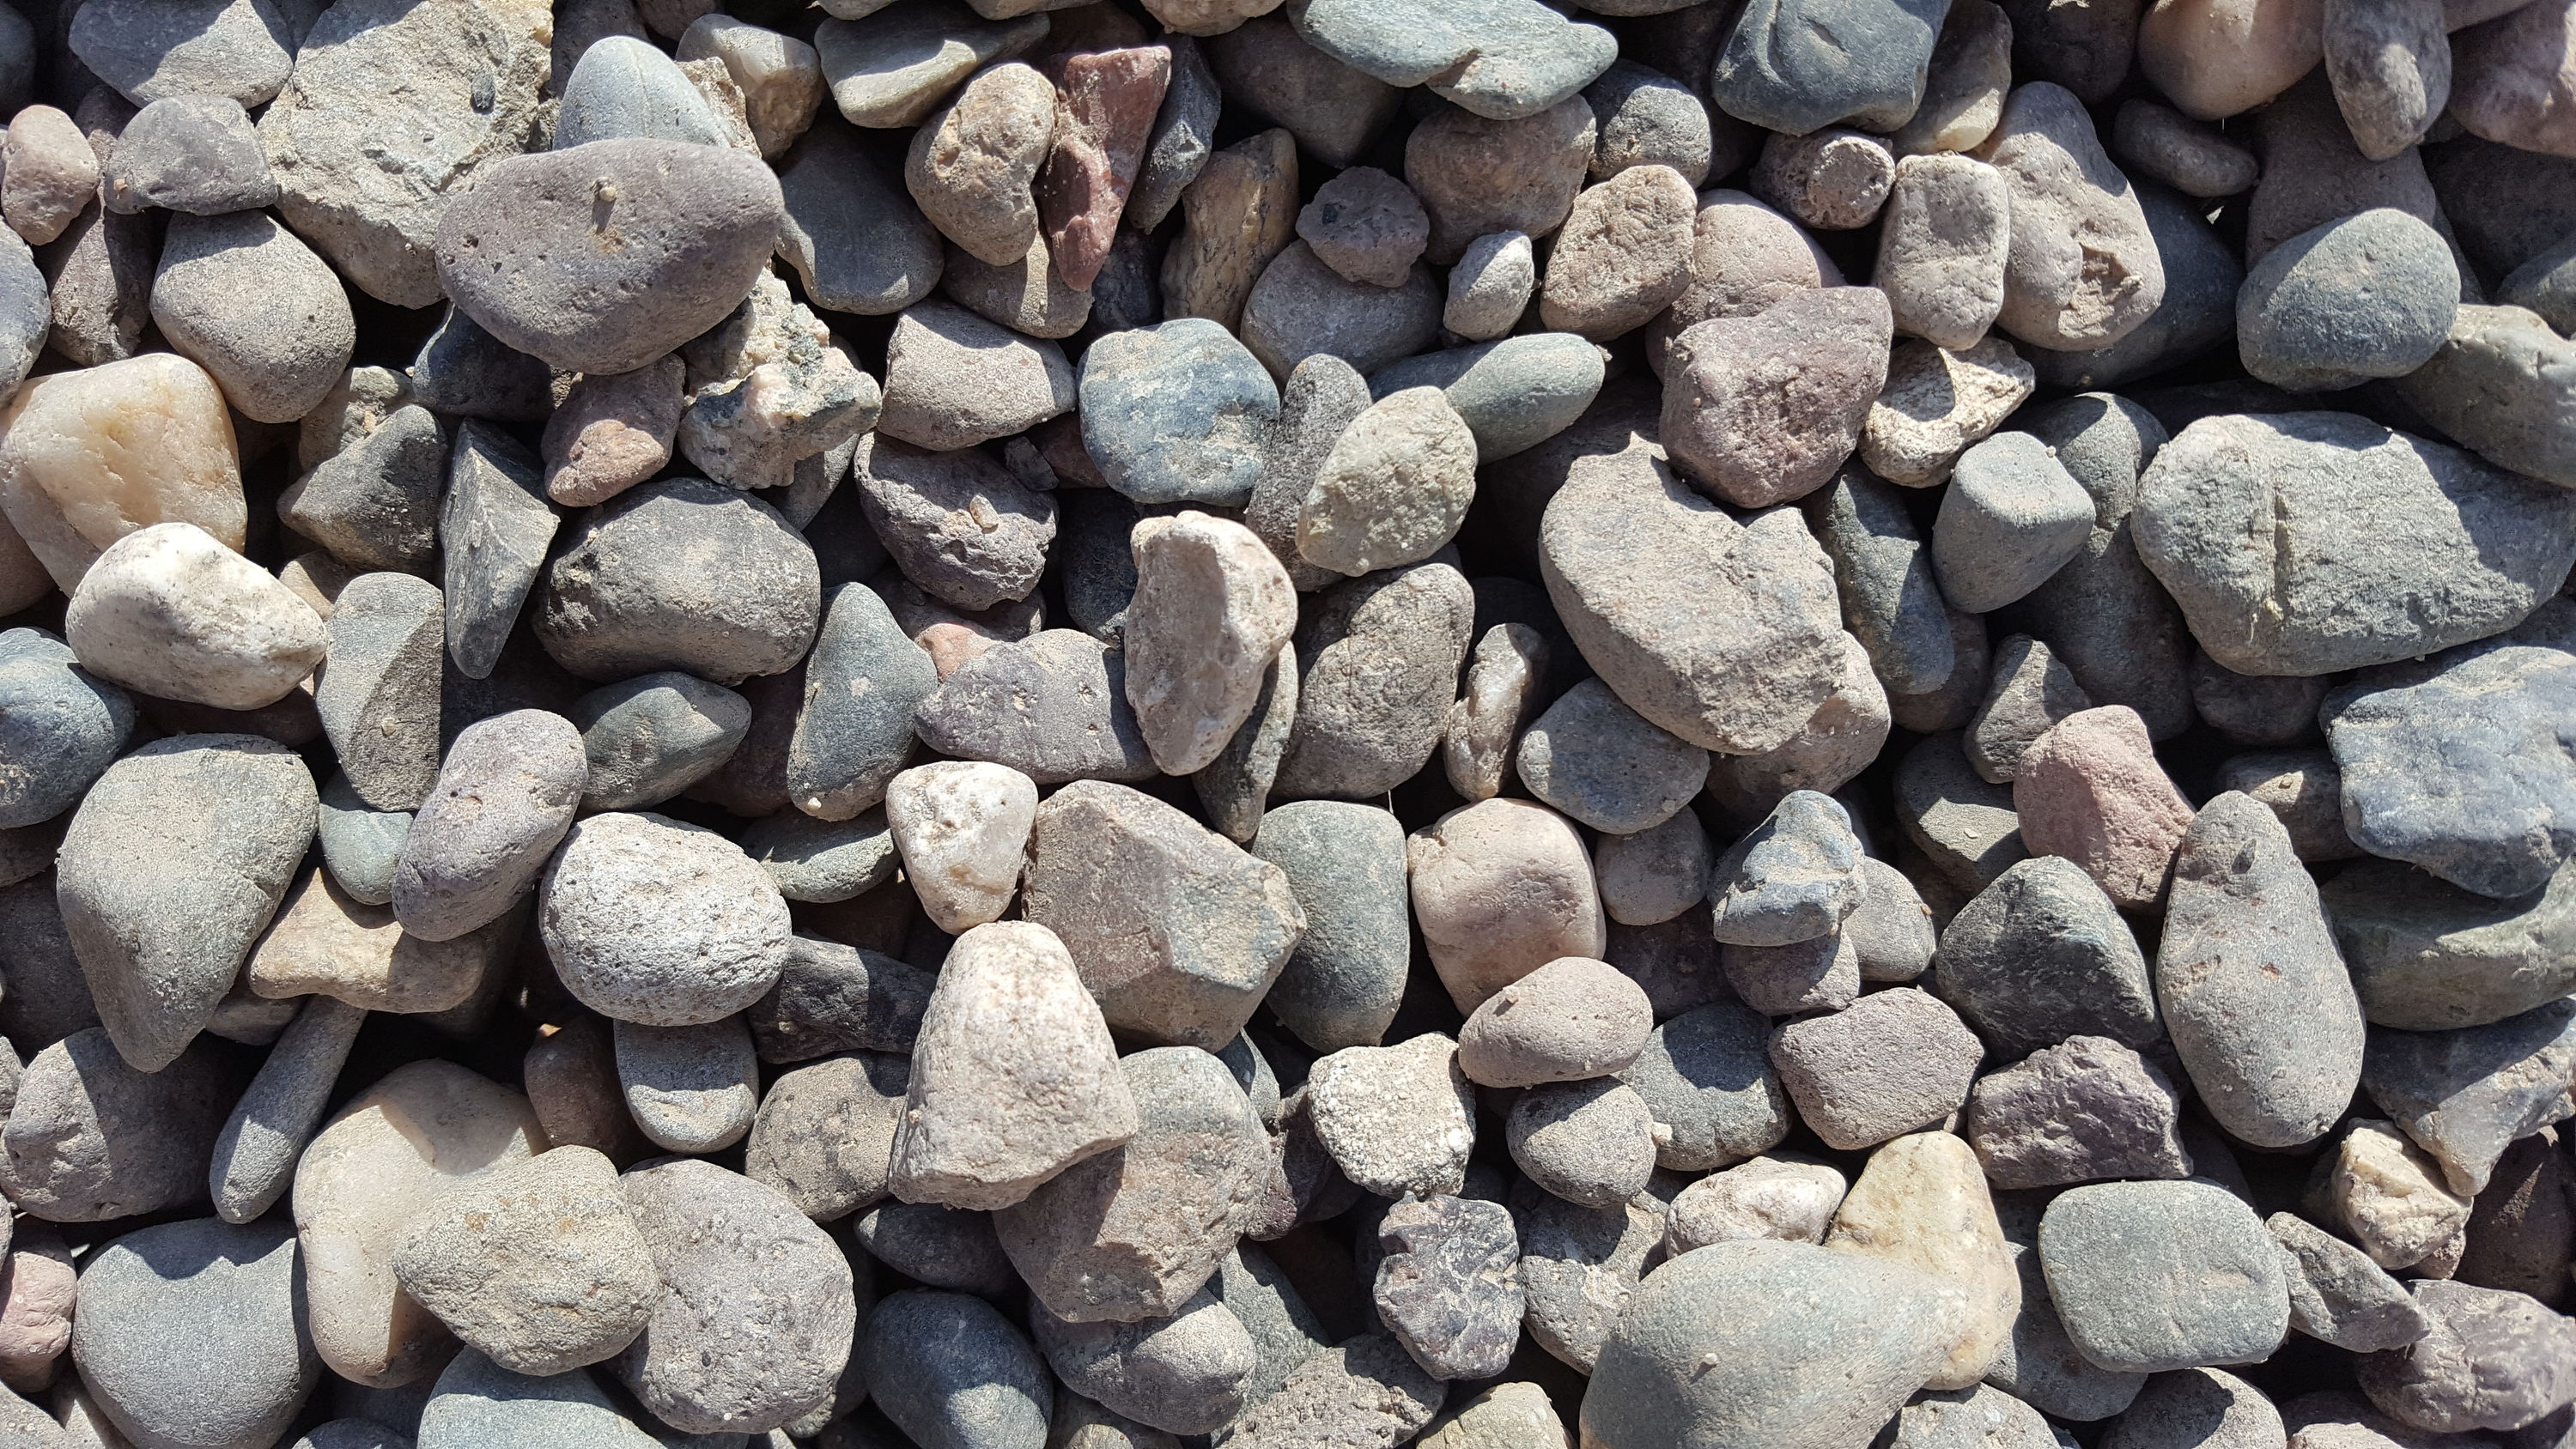 Dyiom 0.1 cu. ft. Multi-Colored Extra Small Gravel 2.5 lbs. 0.2 in.-0.4 in.  Size Landscape Rocks B07SVS372W - The Home Depot